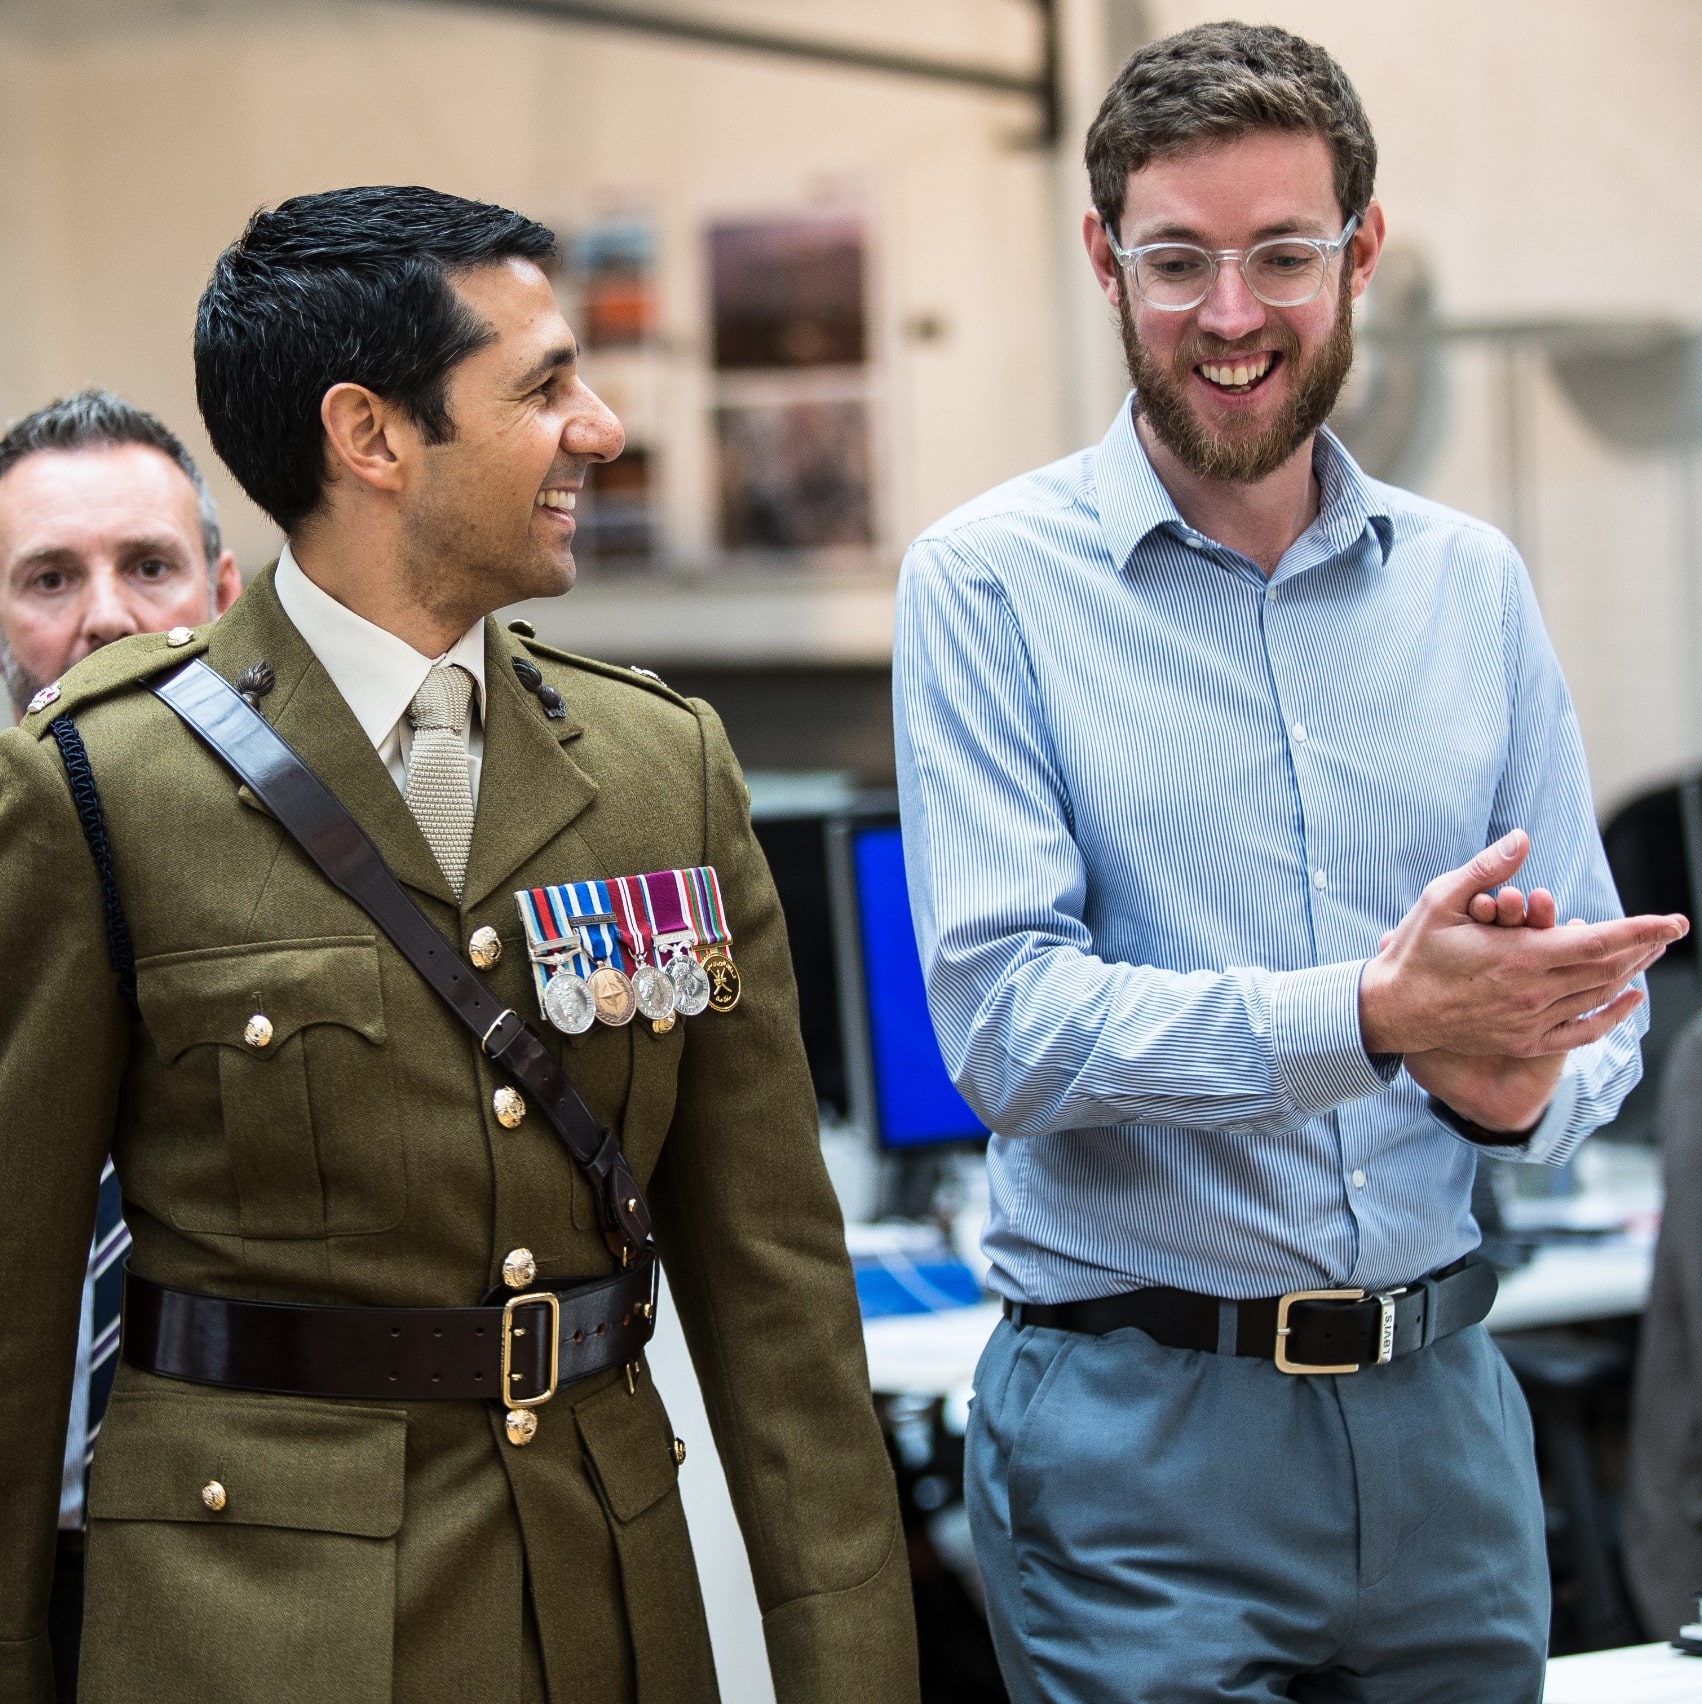 Architect and decorated serviceman engaged in friendly conversation